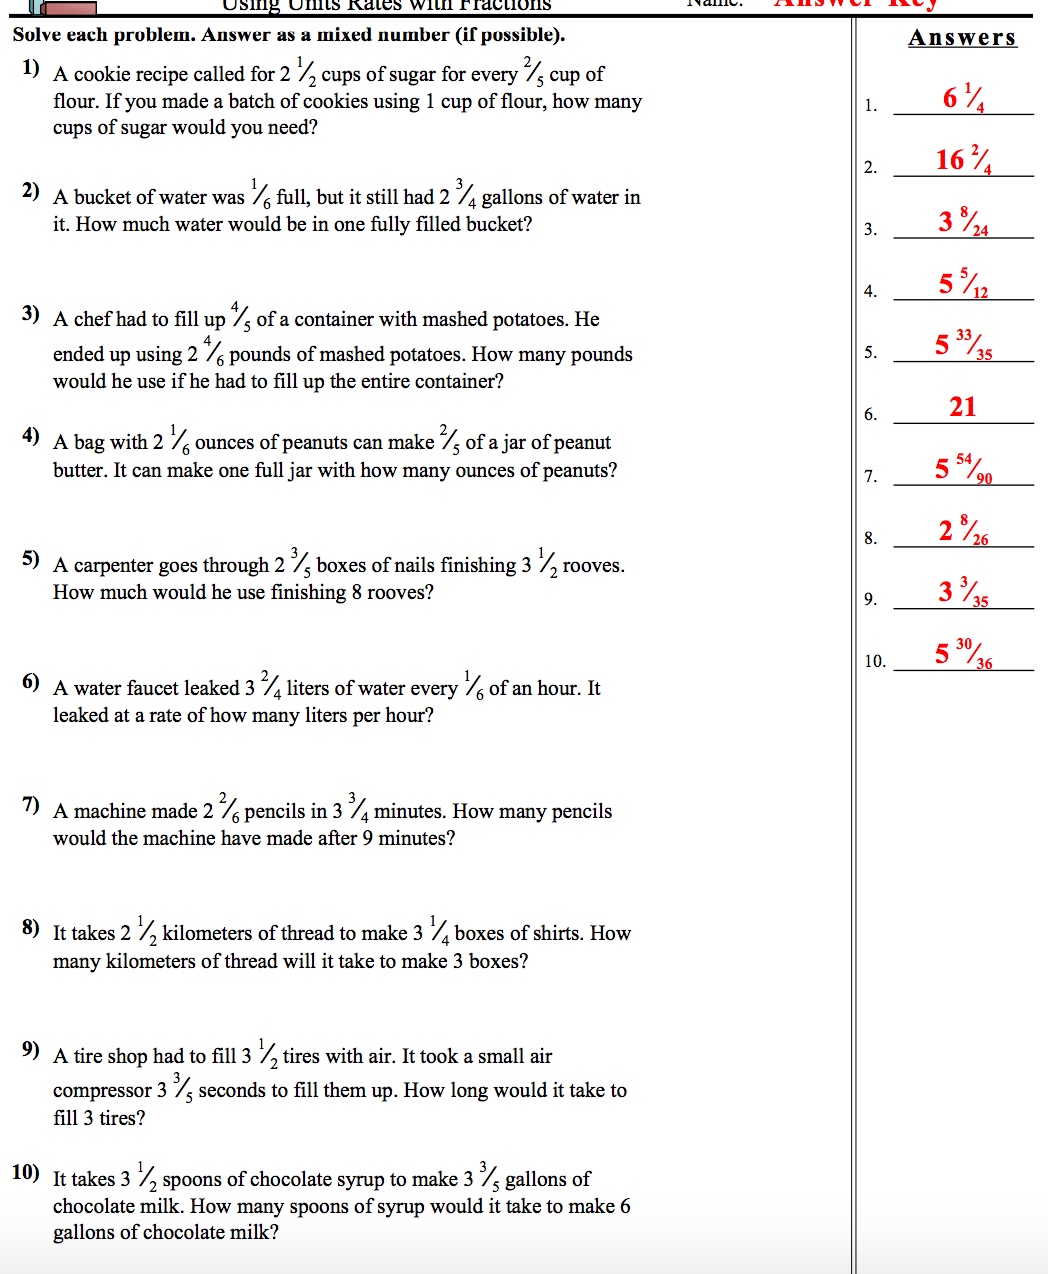 Unit Rates With Fractions Worksheet Answers Nms Self Paced Math